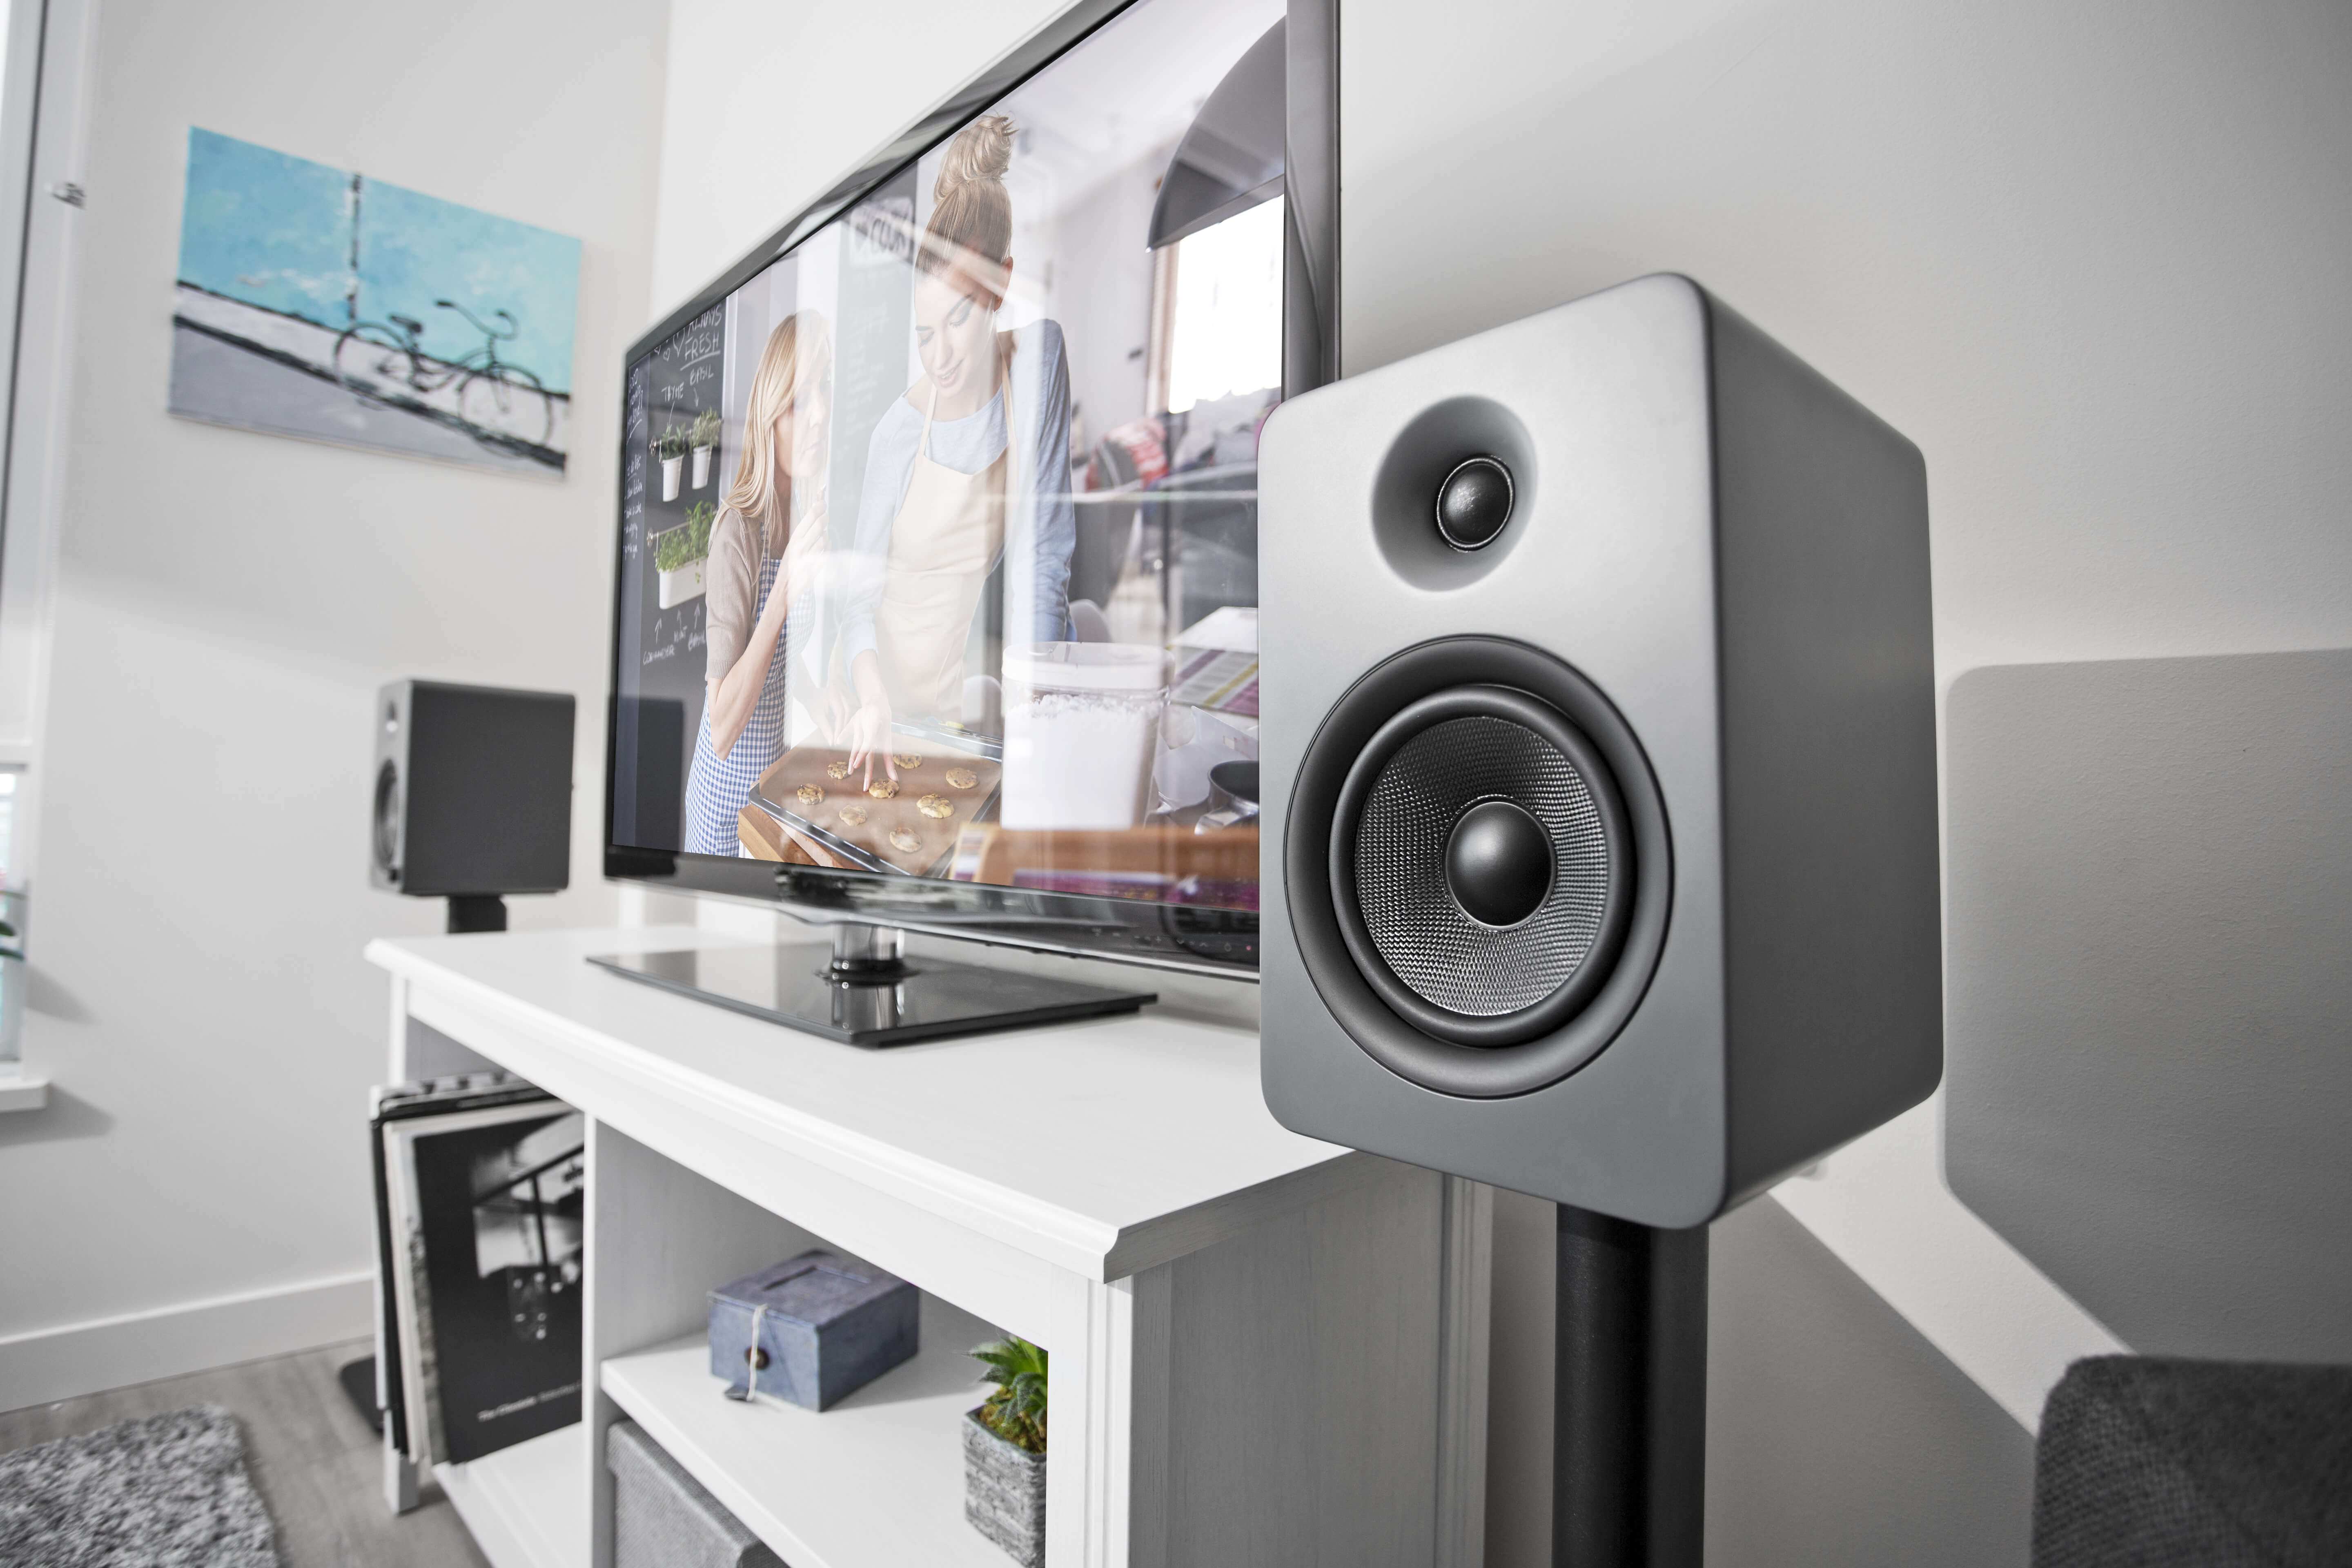 How to get the perfect speaker setup